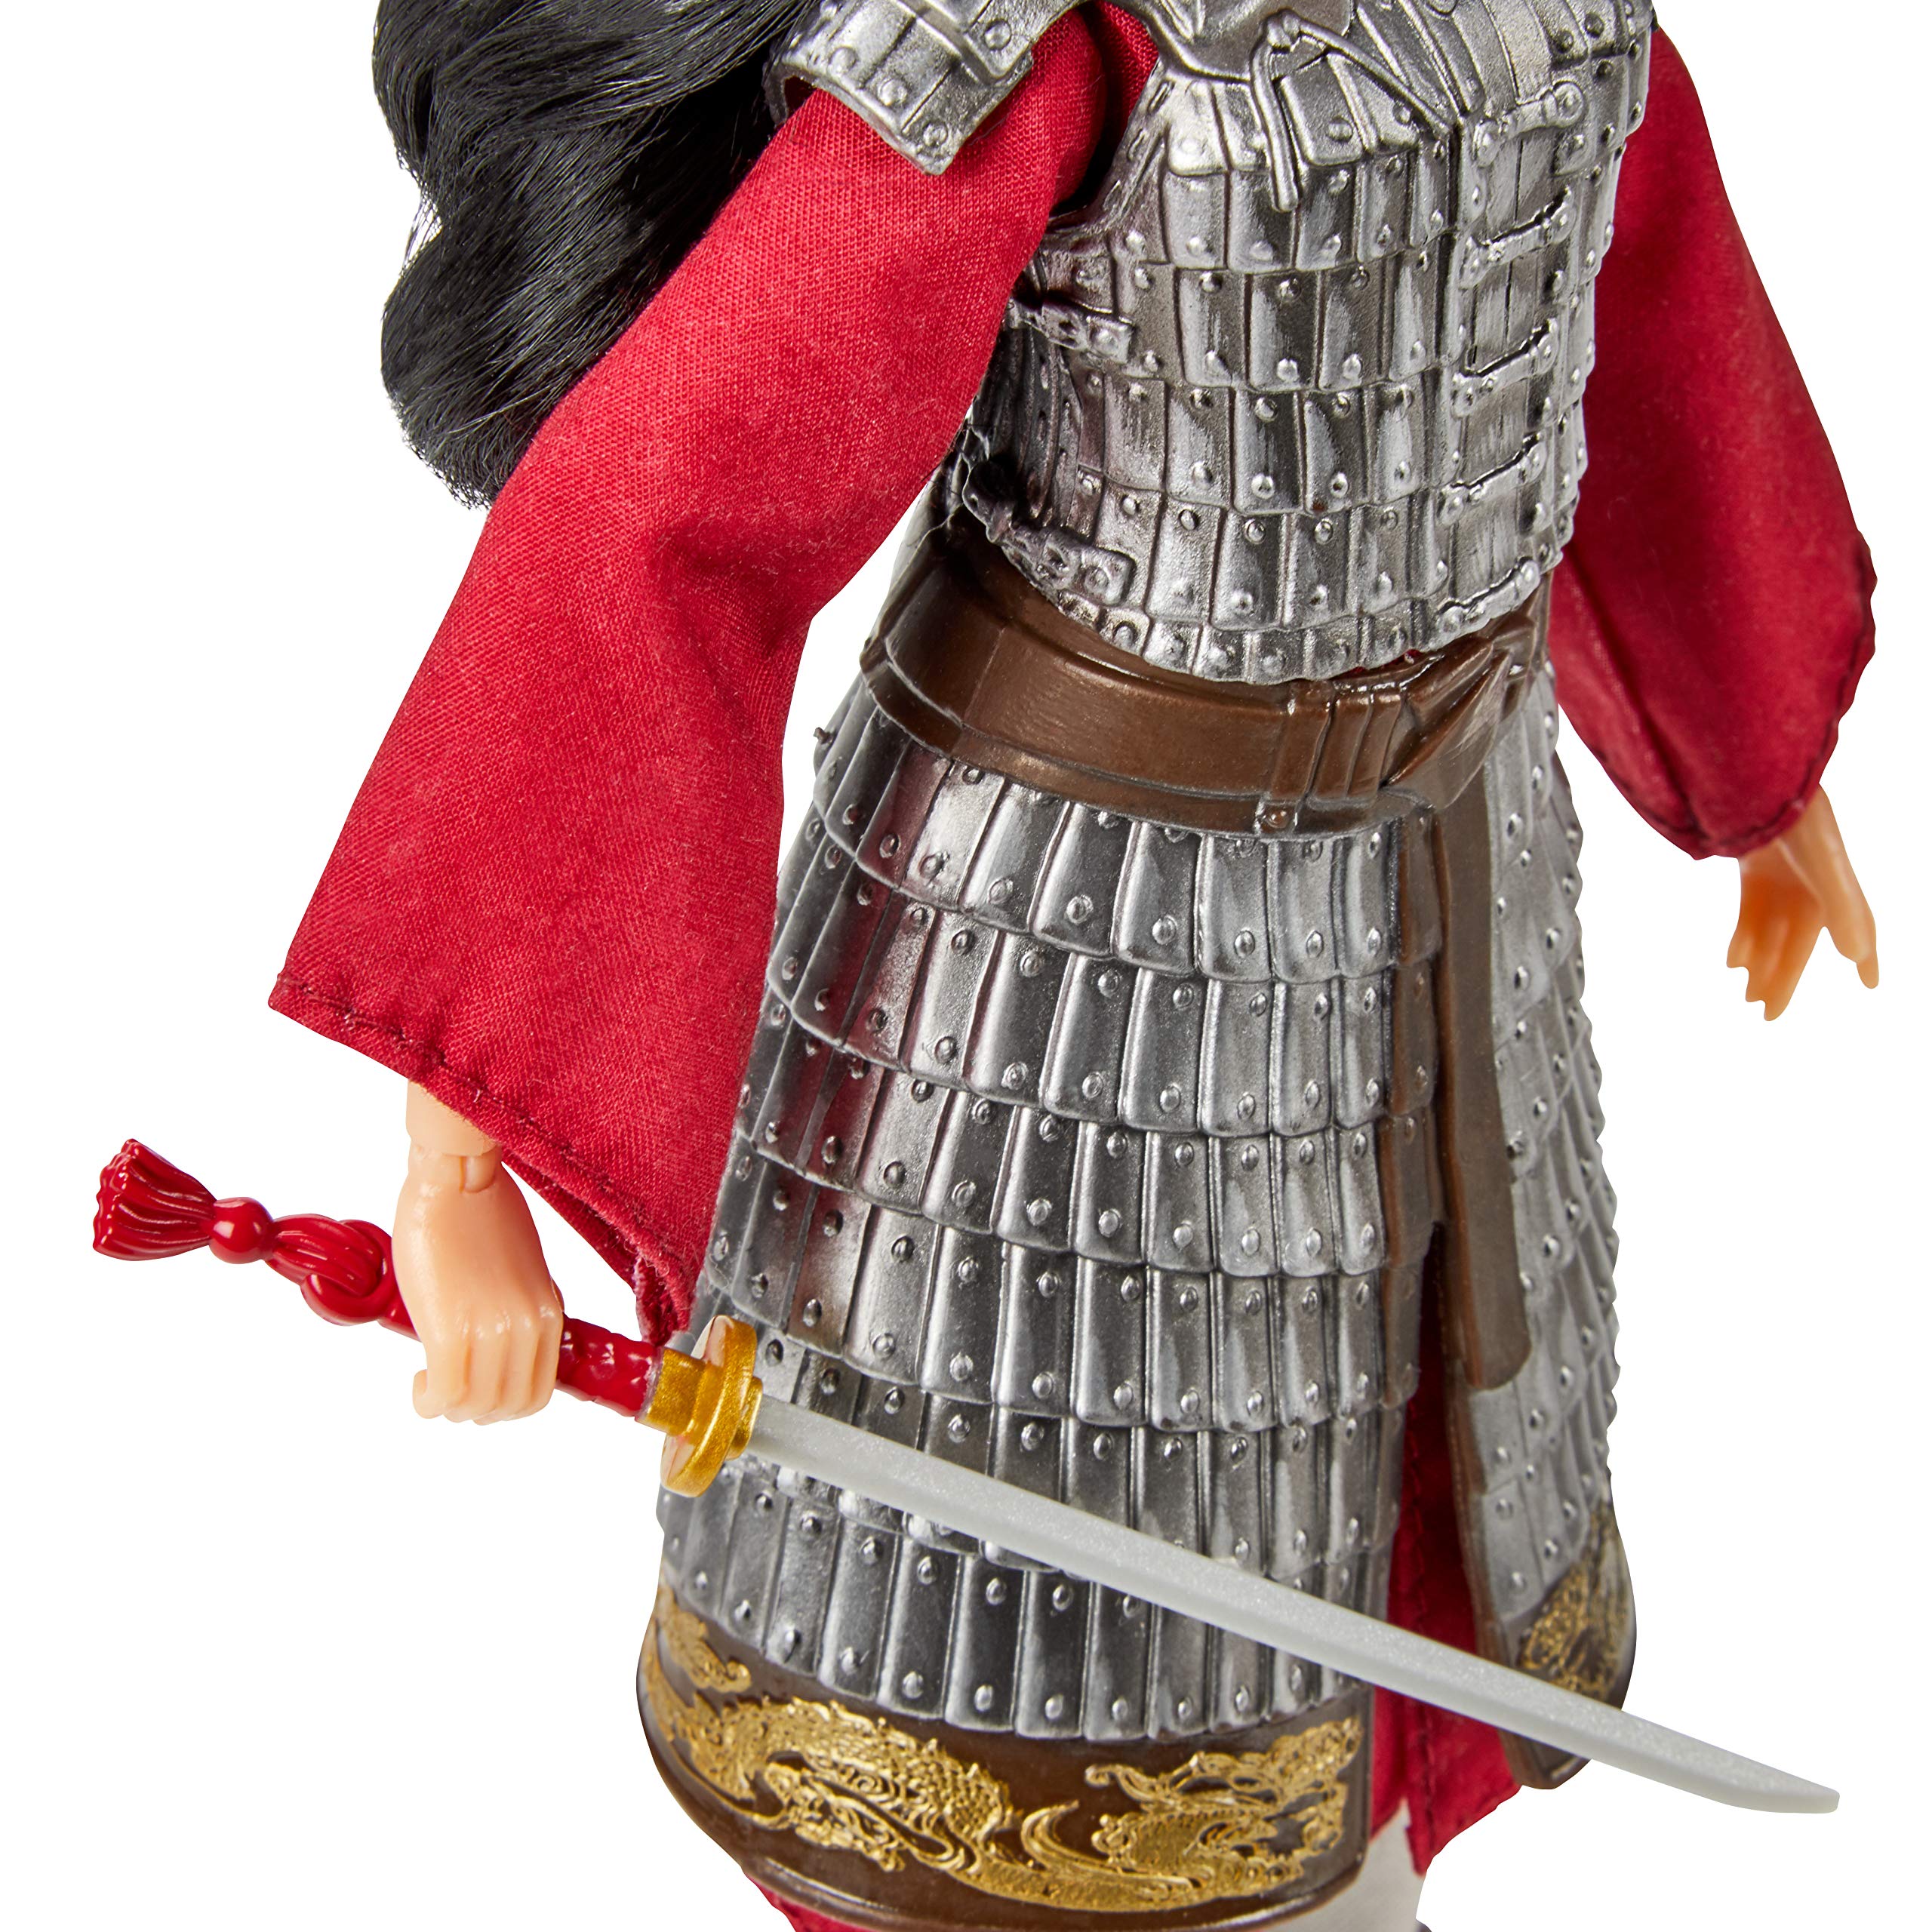 Disney Mulan and Xianniang Dolls with Helmet, Armor, and Sword, Inspired by Disney's Mulan Movie, Toy for Kids and Collectors